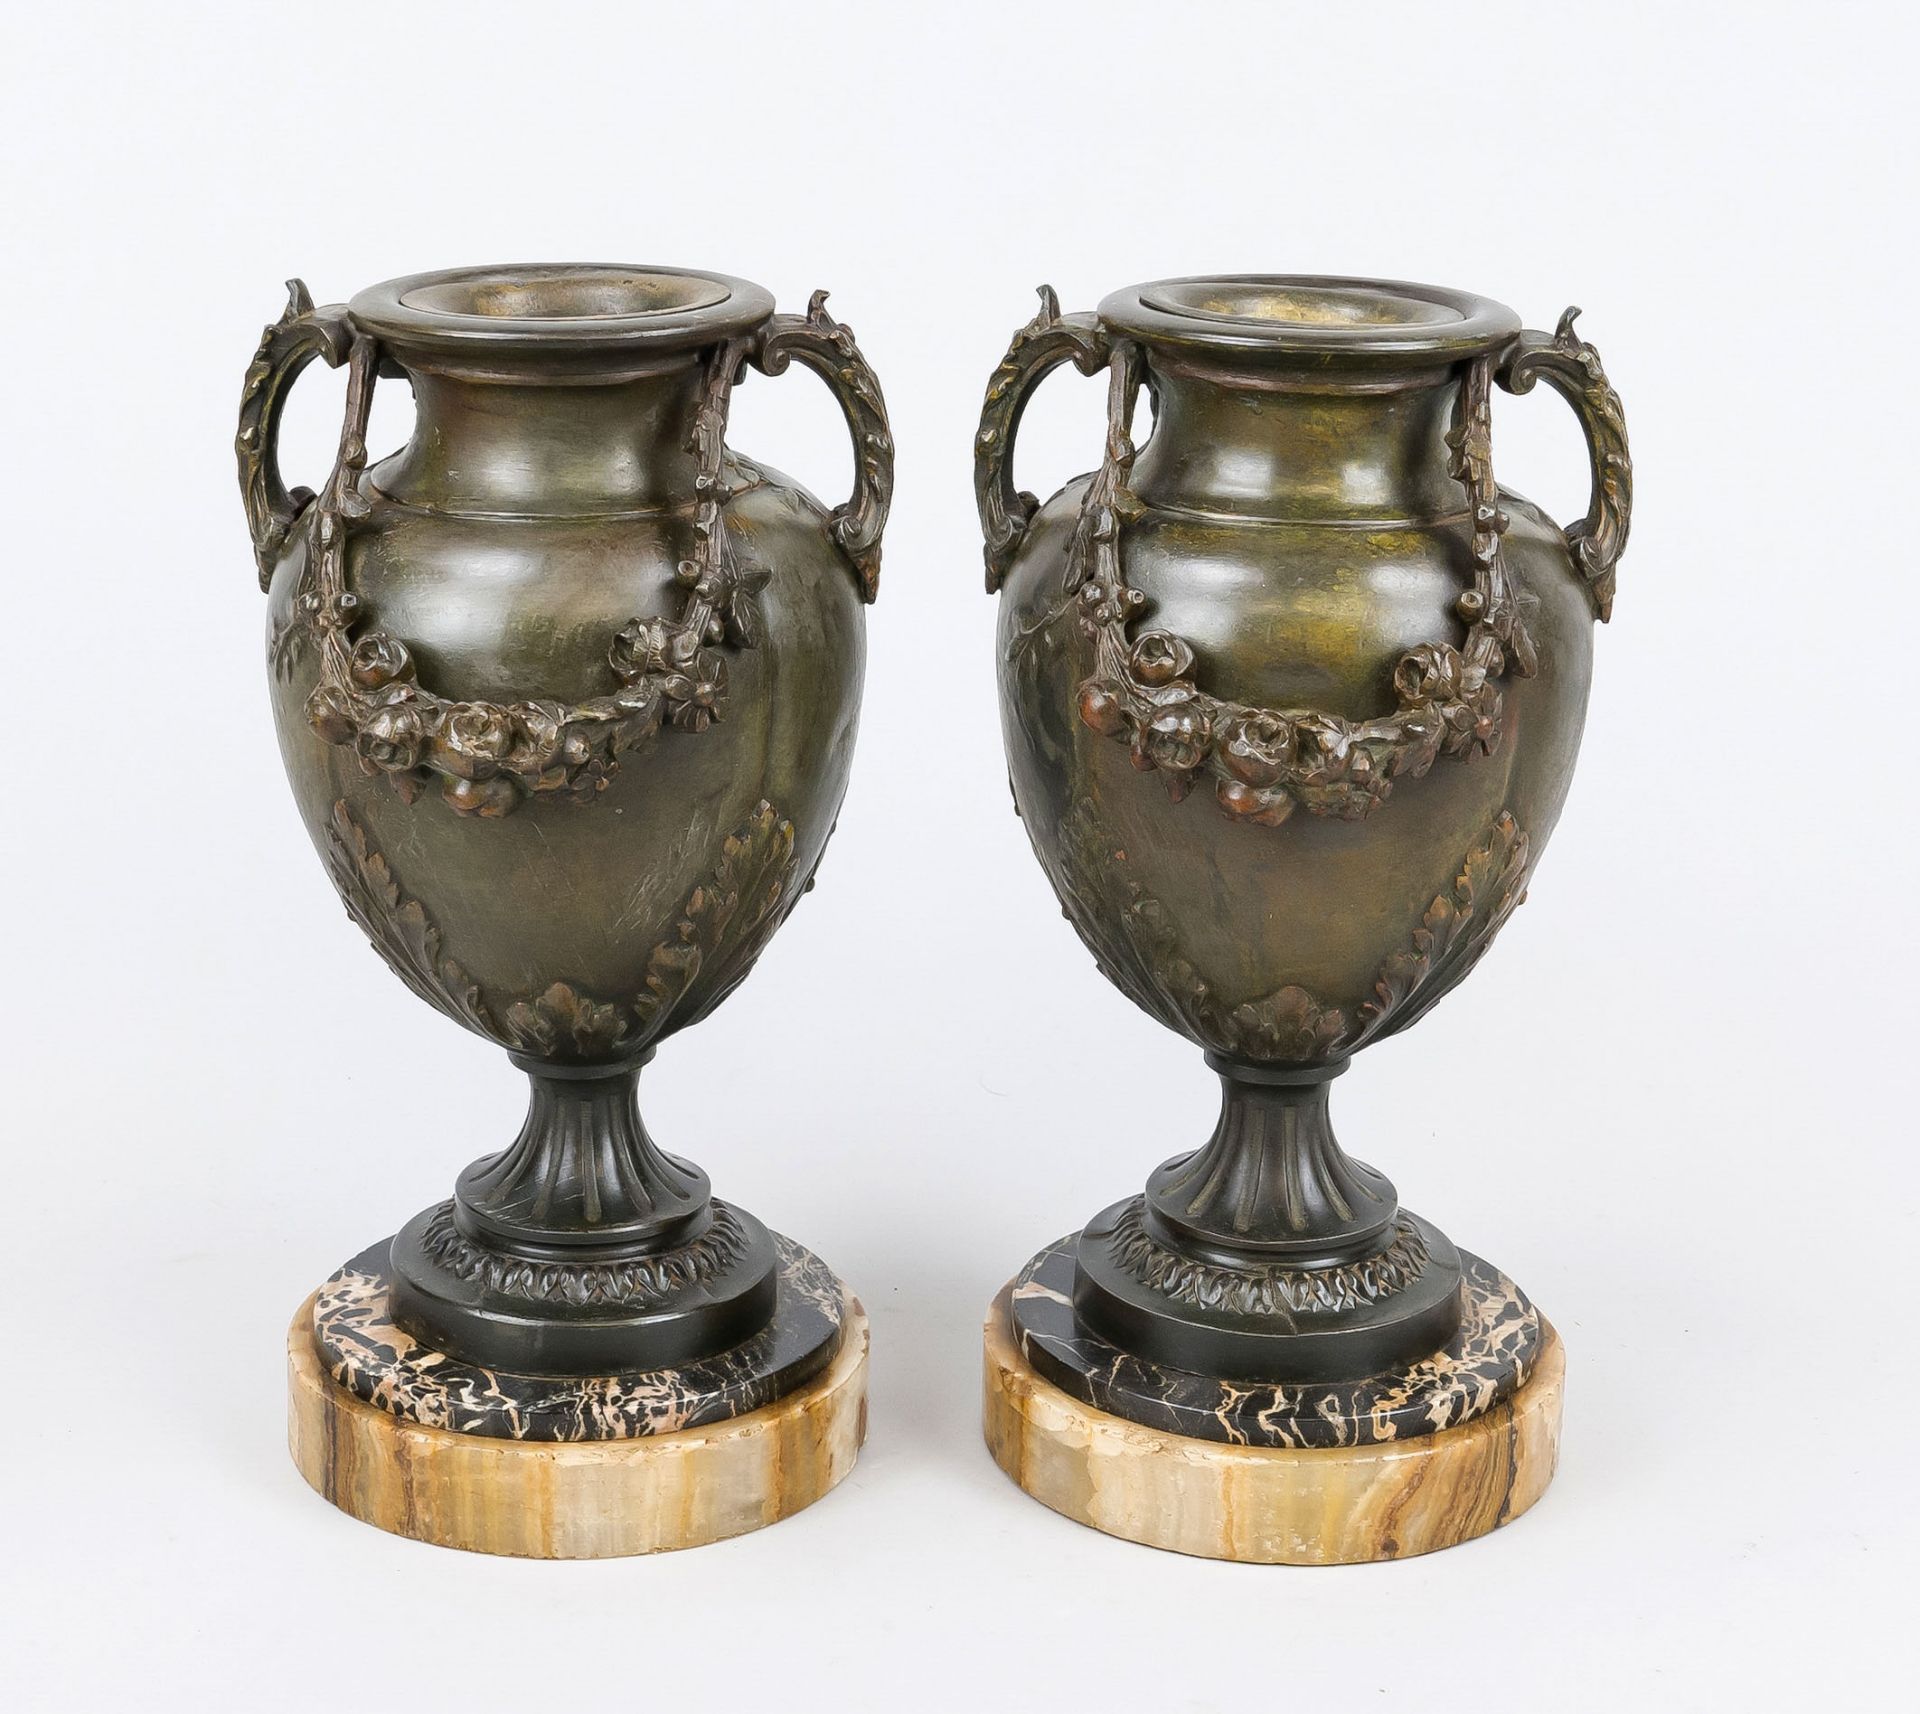 Pair of side plates, late 19th century, bronzed cast metal on a stone base. Vases with relief